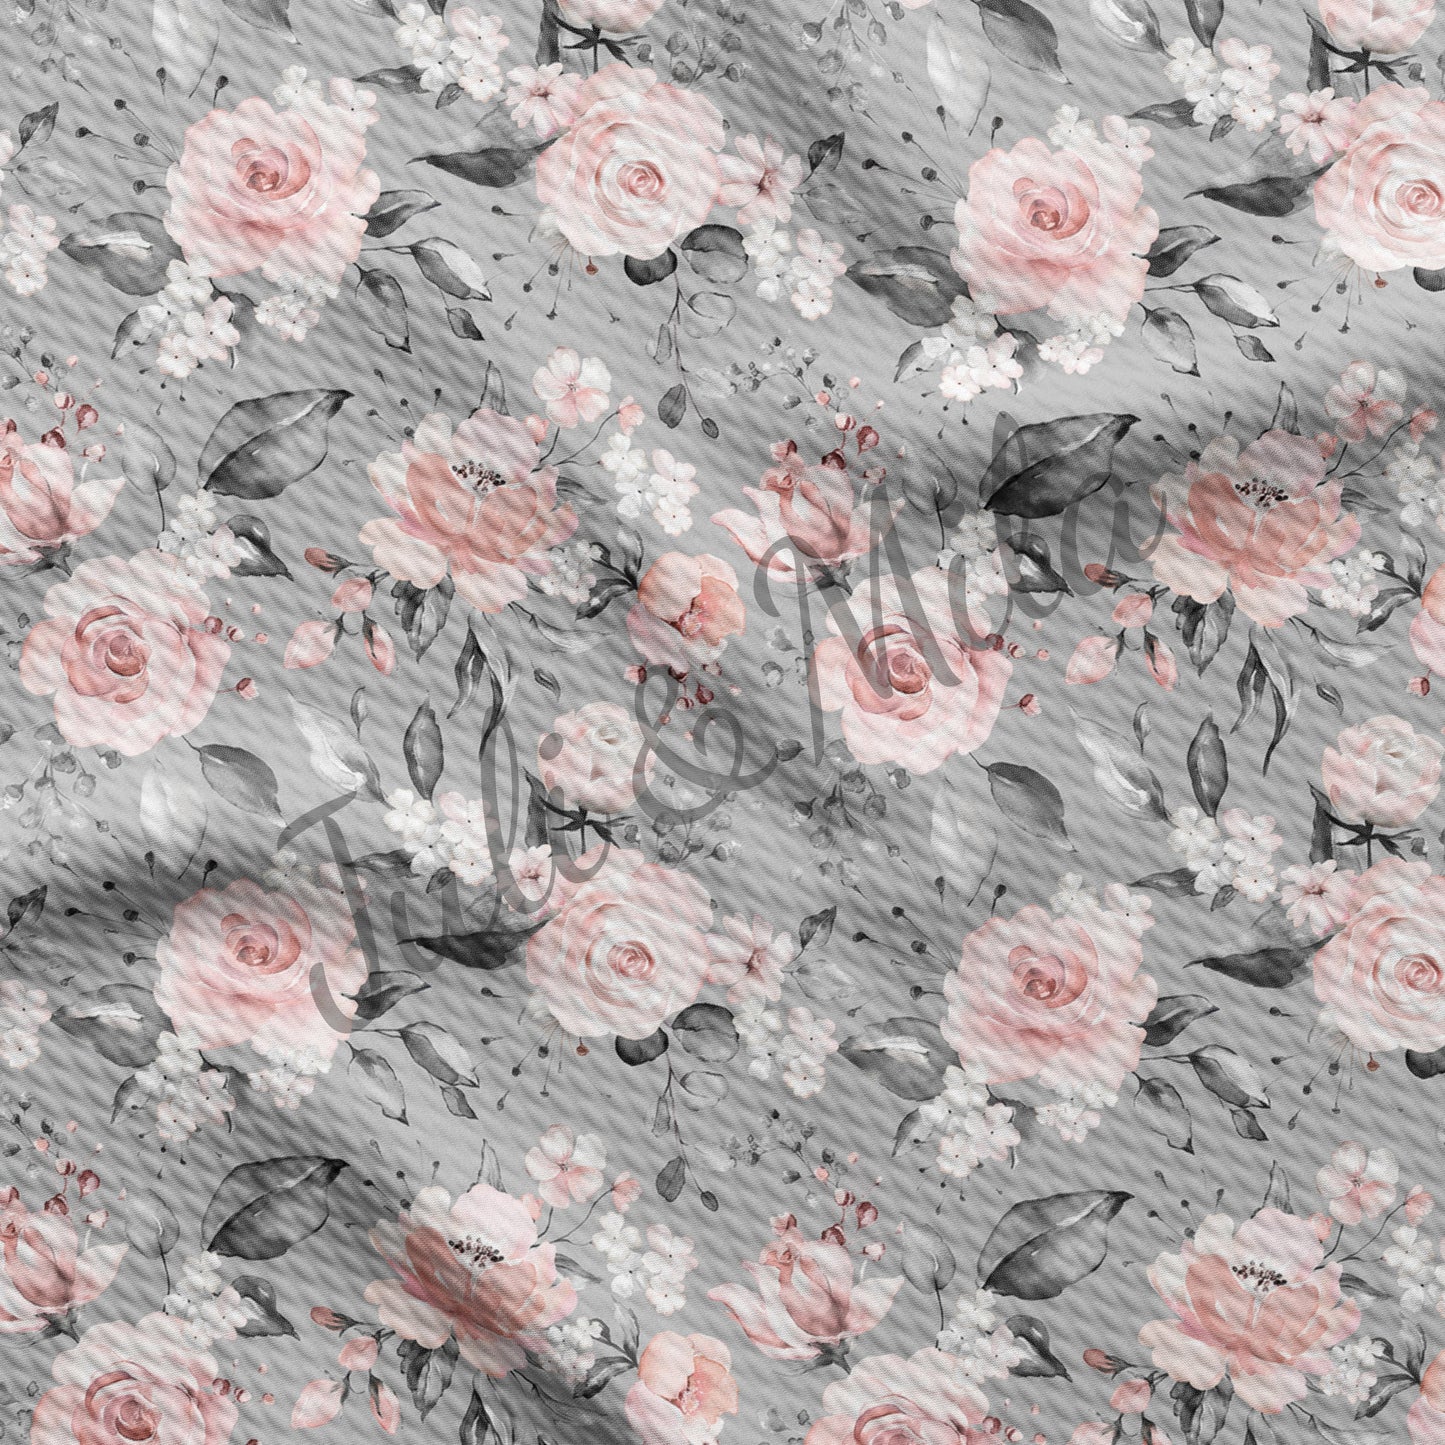 Printed Floral  Bullet Textured Fabric by the yard AA251